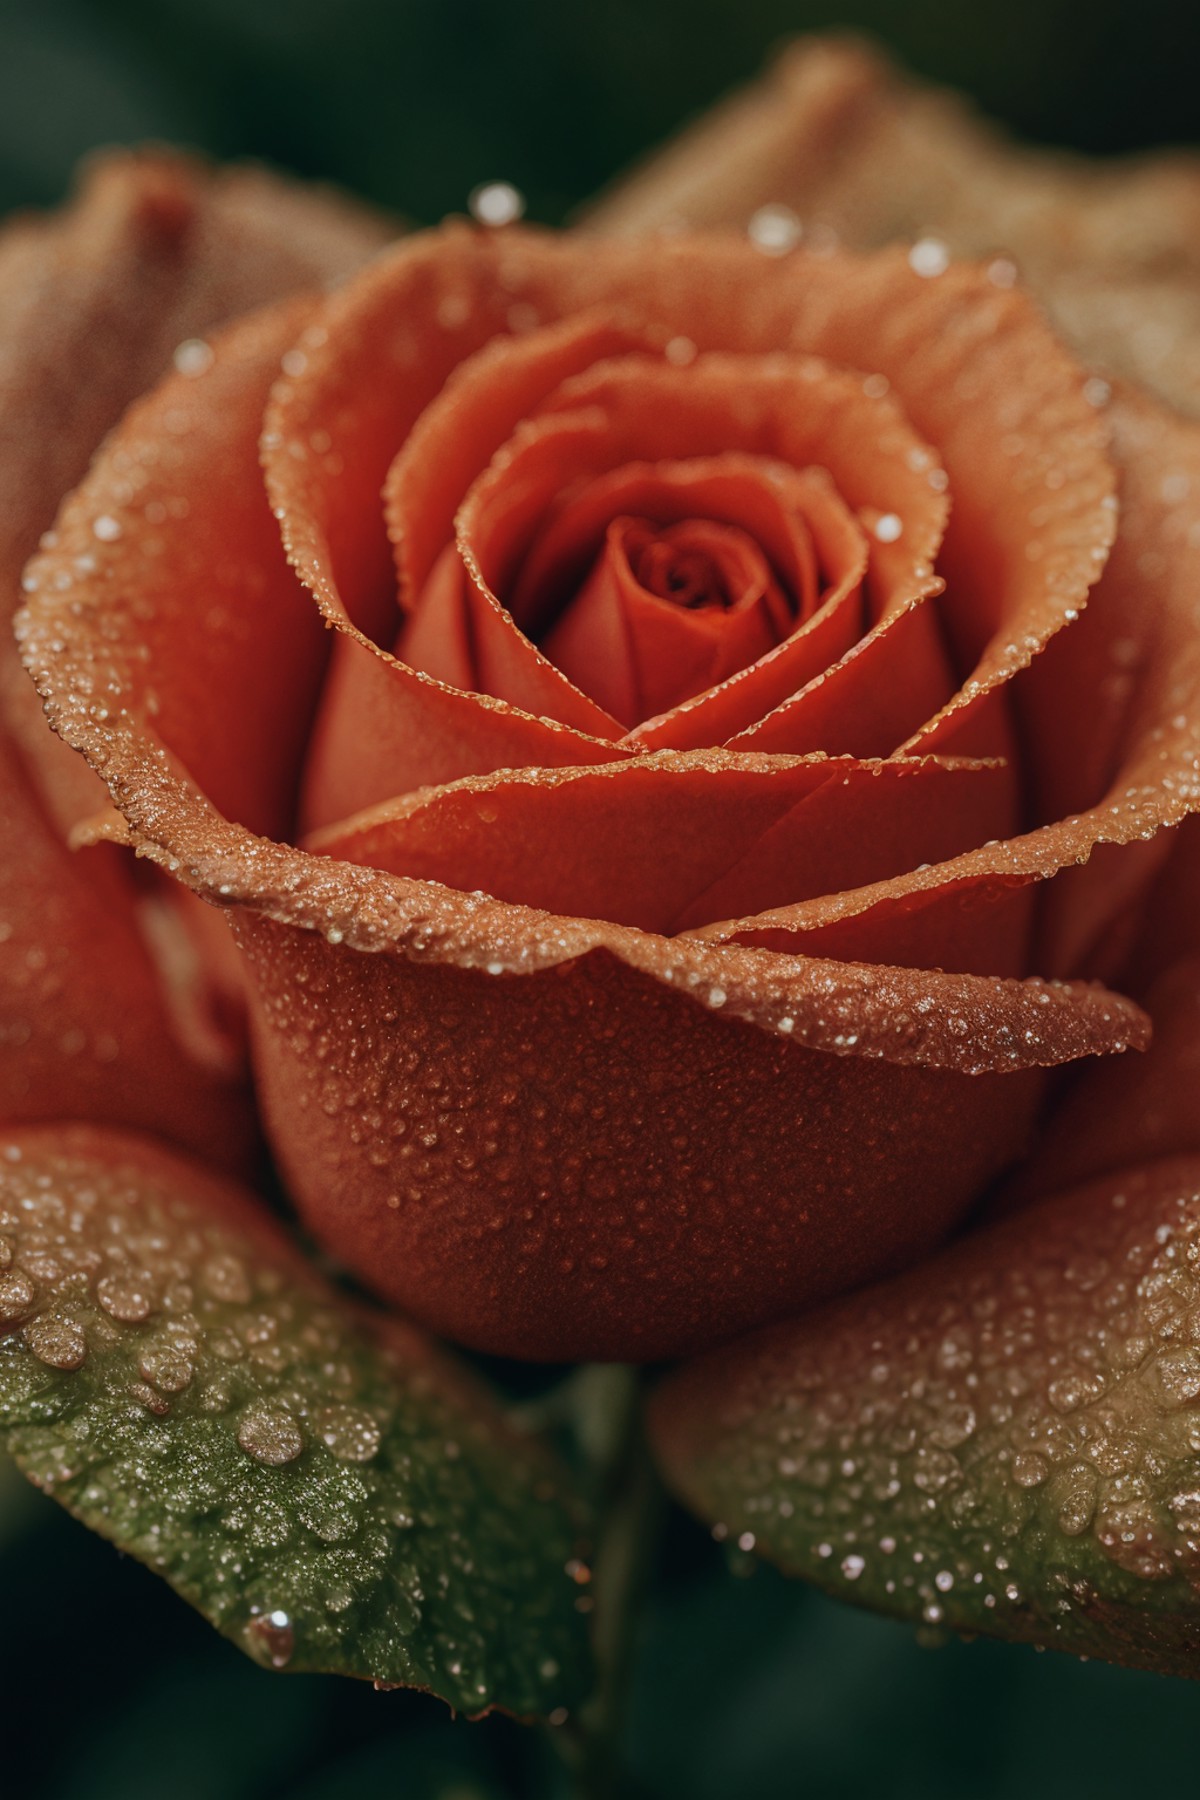 Close-up photograph of a dew-kissed red rose, details accentuated with a macro lens, revealing the texture and color nuances